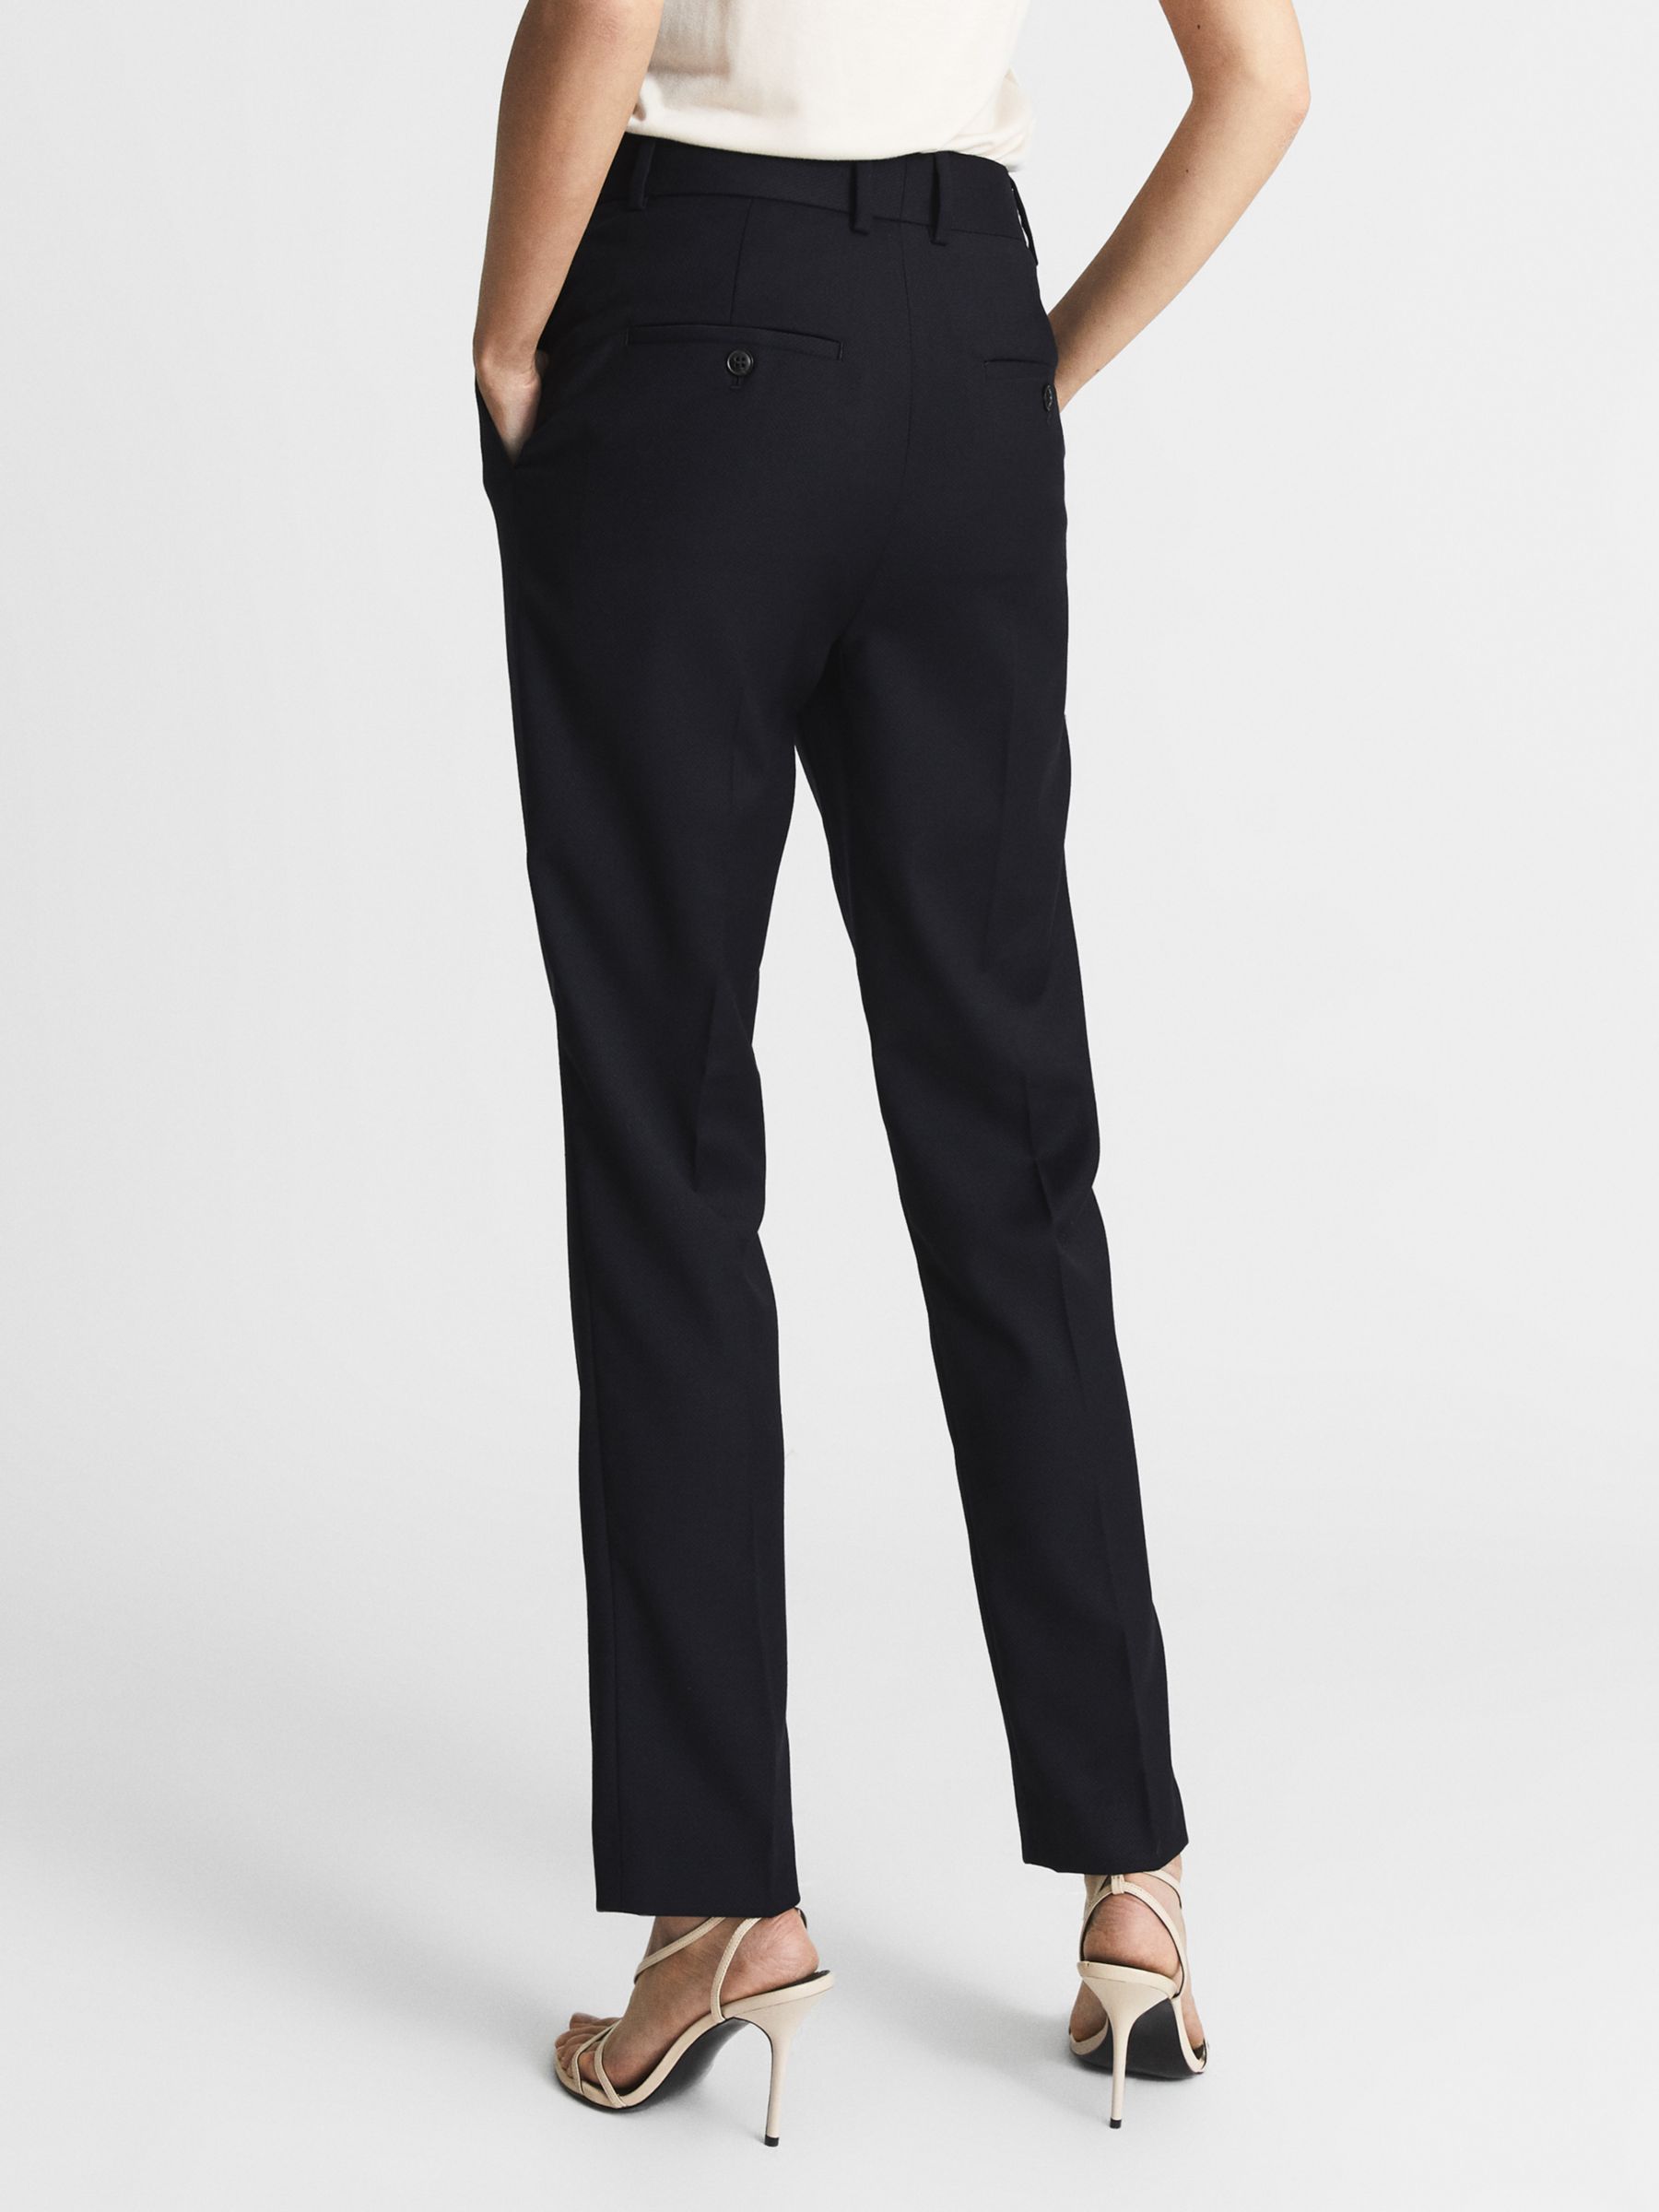 Reiss Haisley Wool Blend Tailored Trousers, Navy, 6